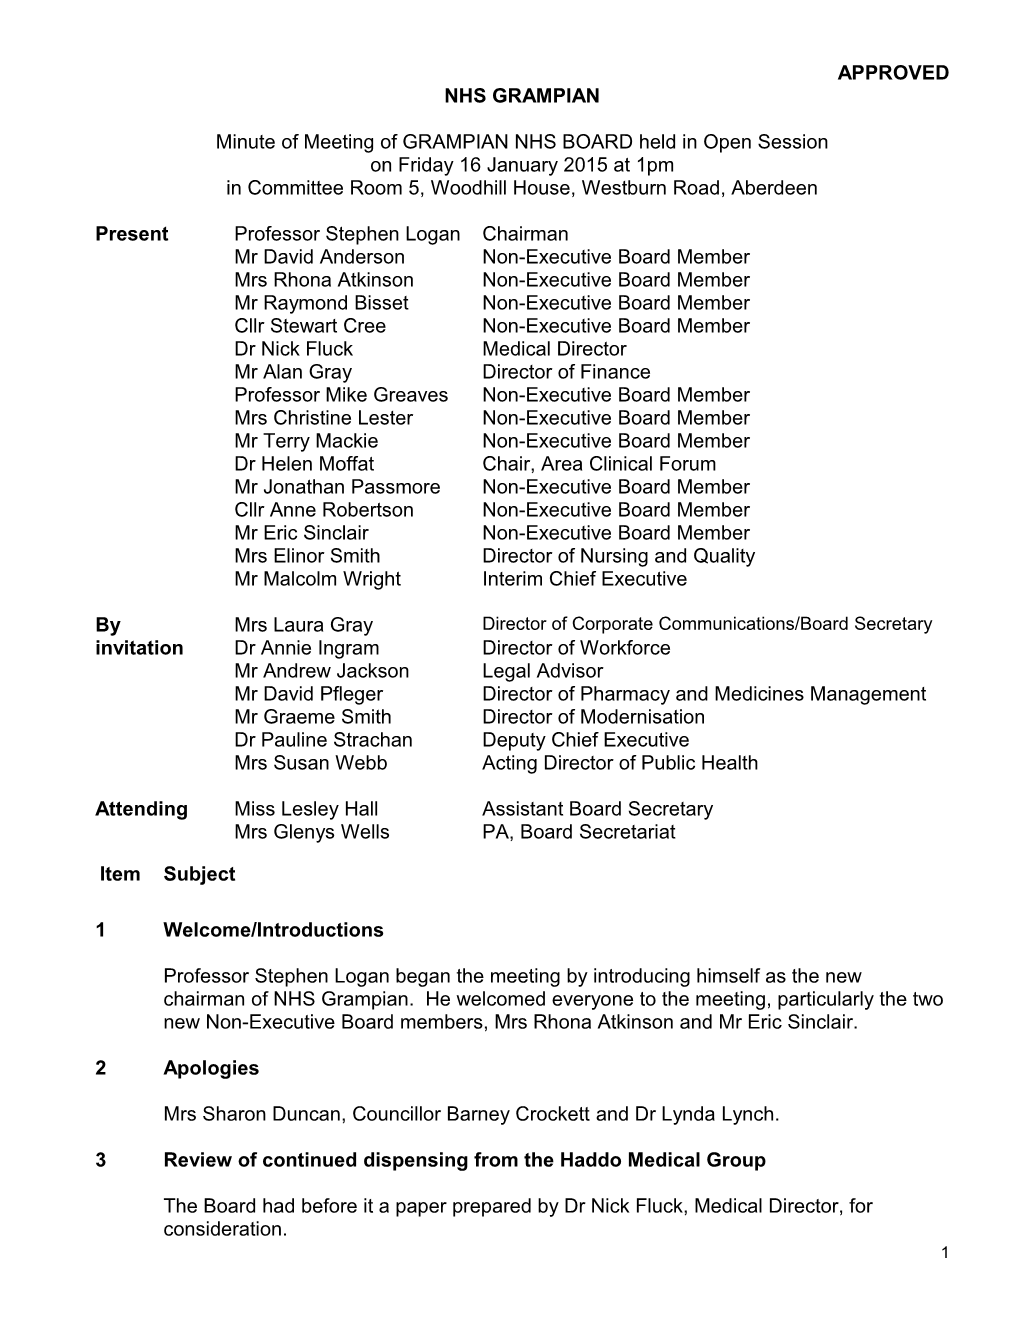 Approved Board Minute 16 January 2015